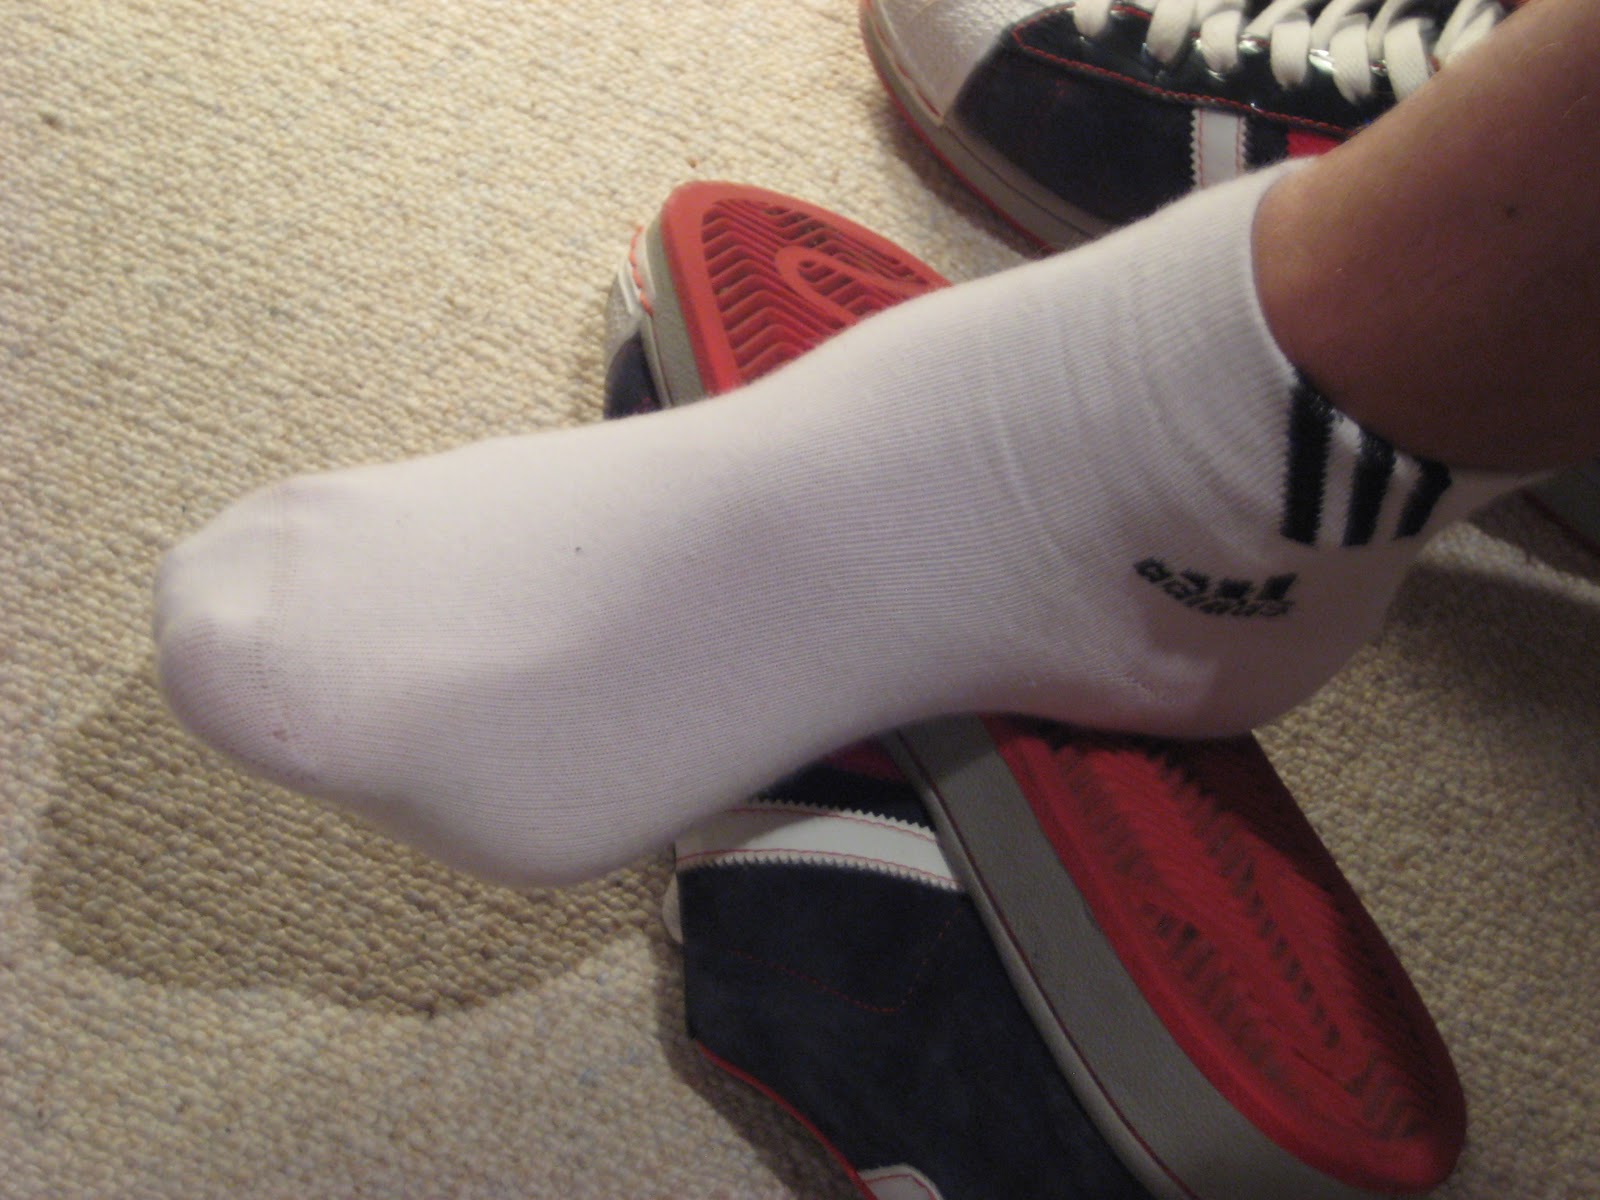 sneakers & socks: ADIDAS white ankle socks with black logo on ankle and ...